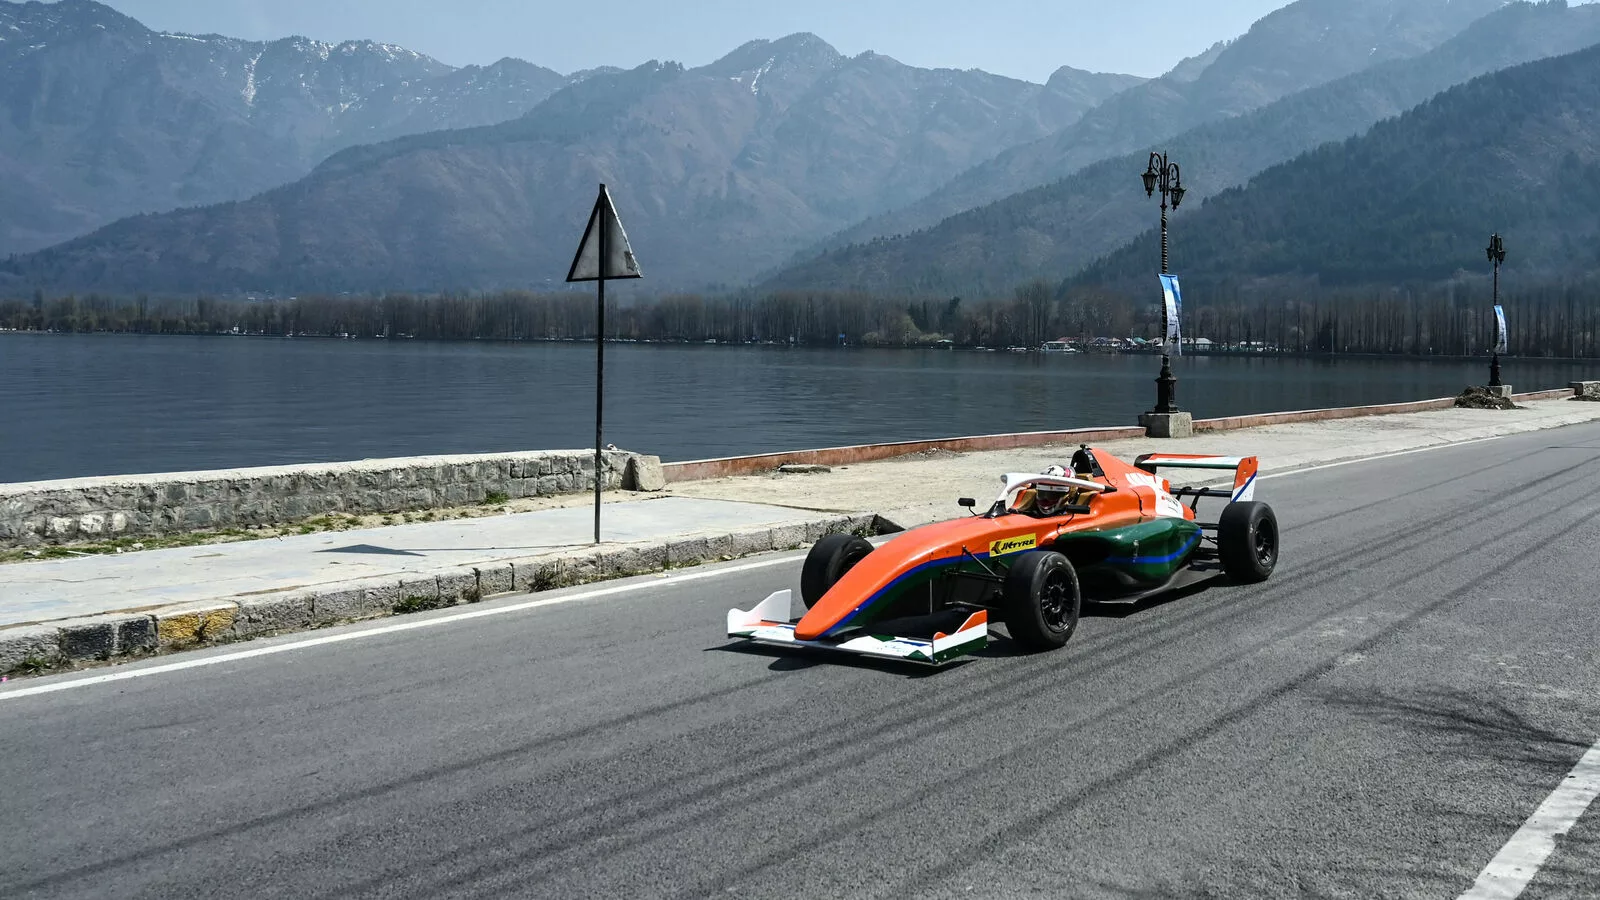 Fast lane with a view: Kashmir witnesses first Formula 4 race show near Dal Lake